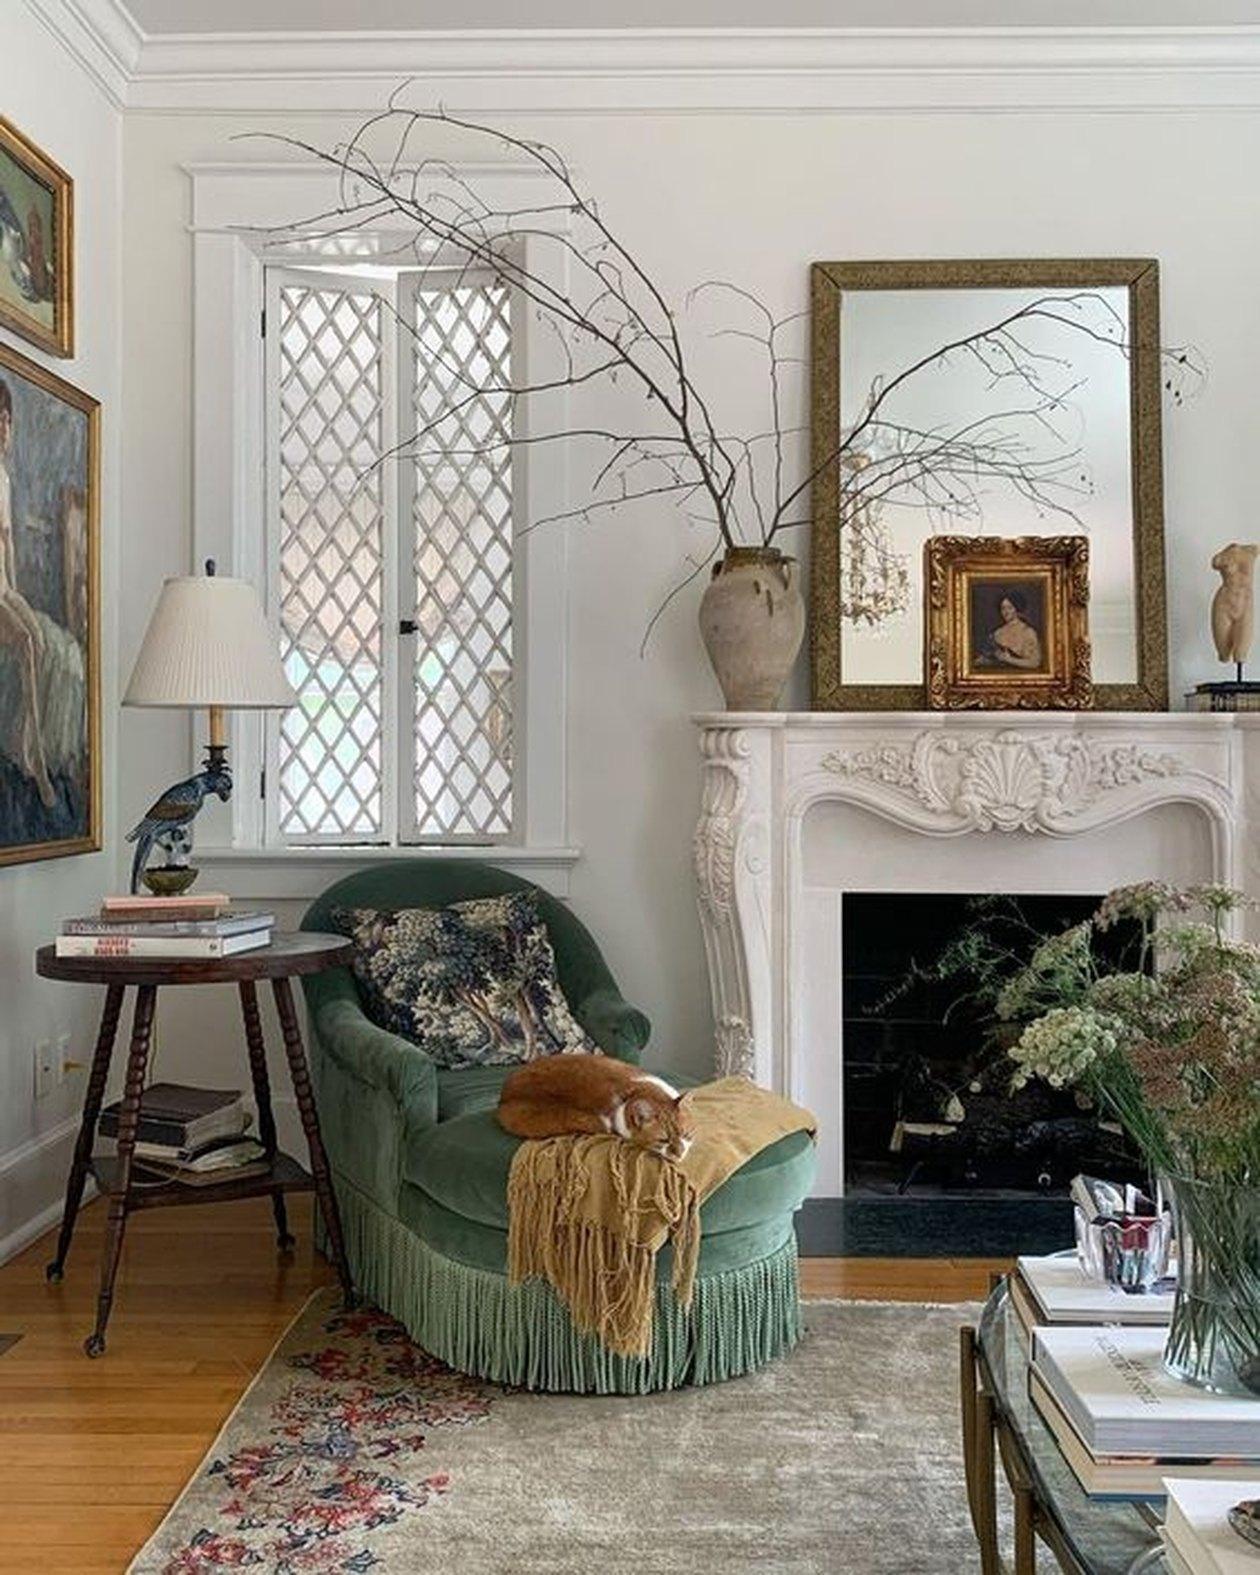 Romantic French country fireplace sitting corner by Carly Summers